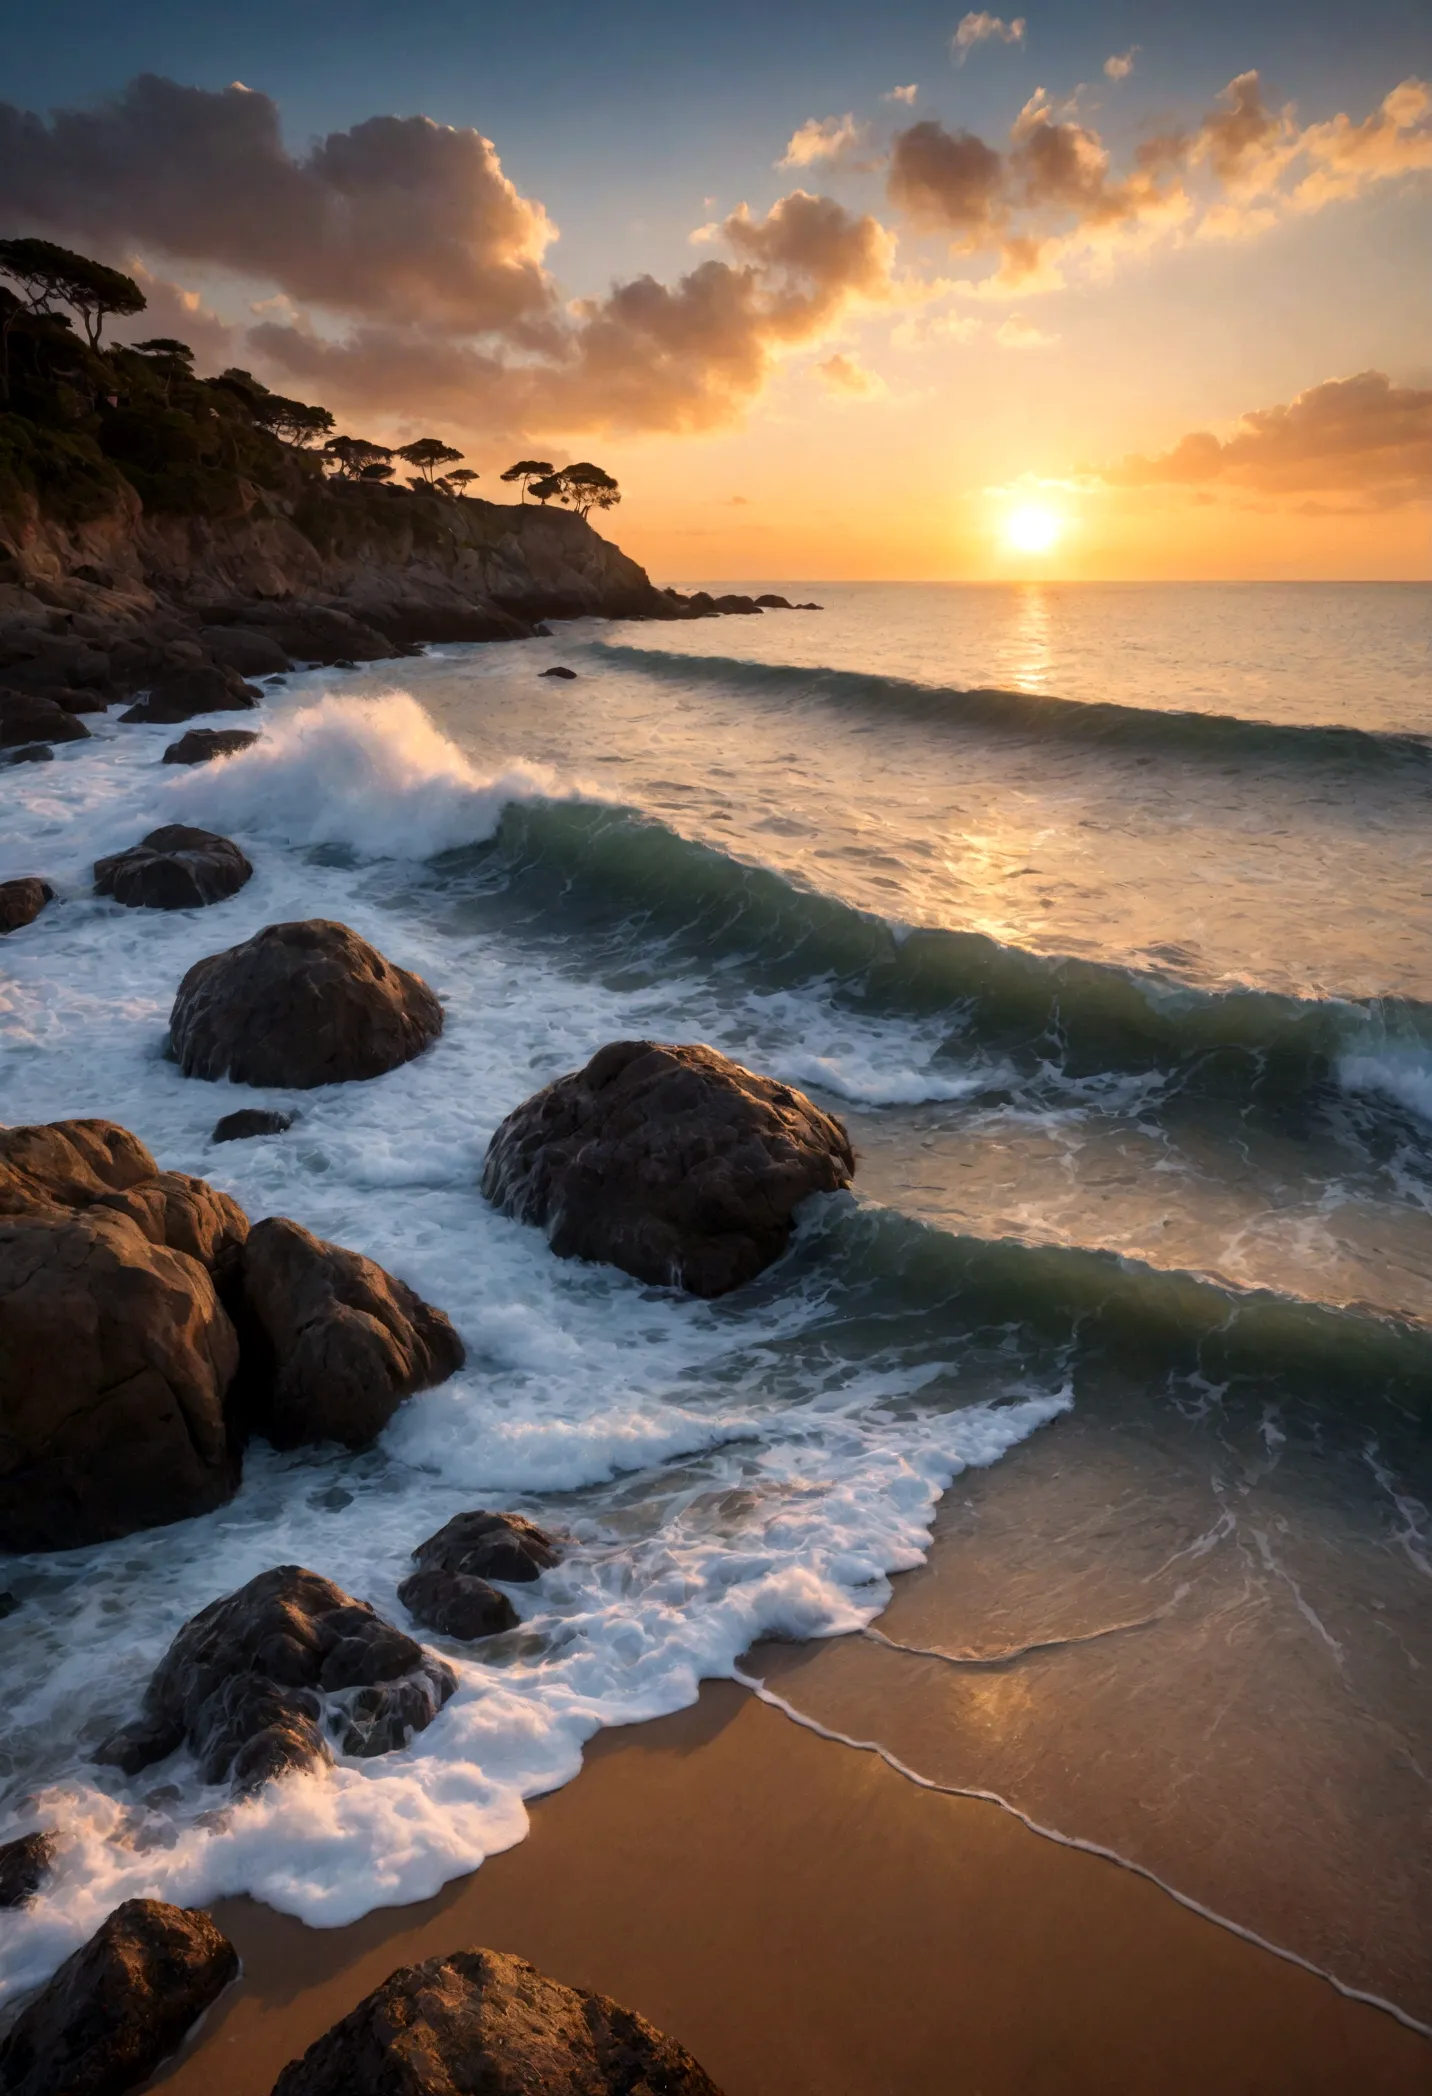 "Imagine a serene coastal scene during golden hour, The sea and the sky merge into one，Amazing. This image was taken with a Cano...